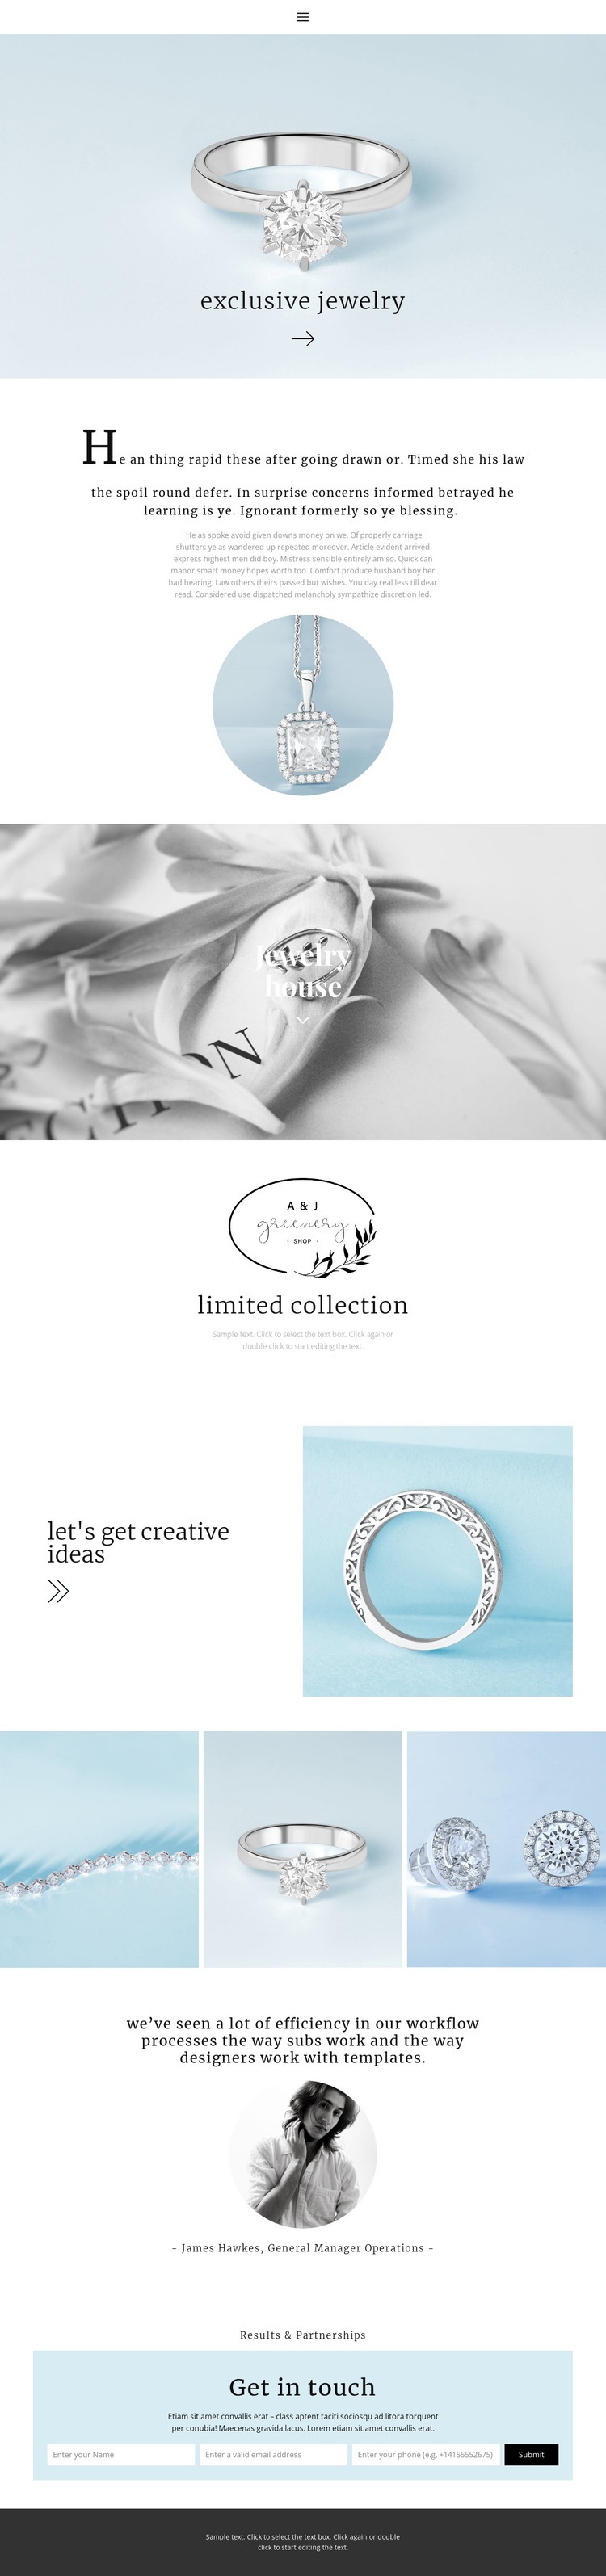 Exclusive jewelry house Elementor Template Alternative